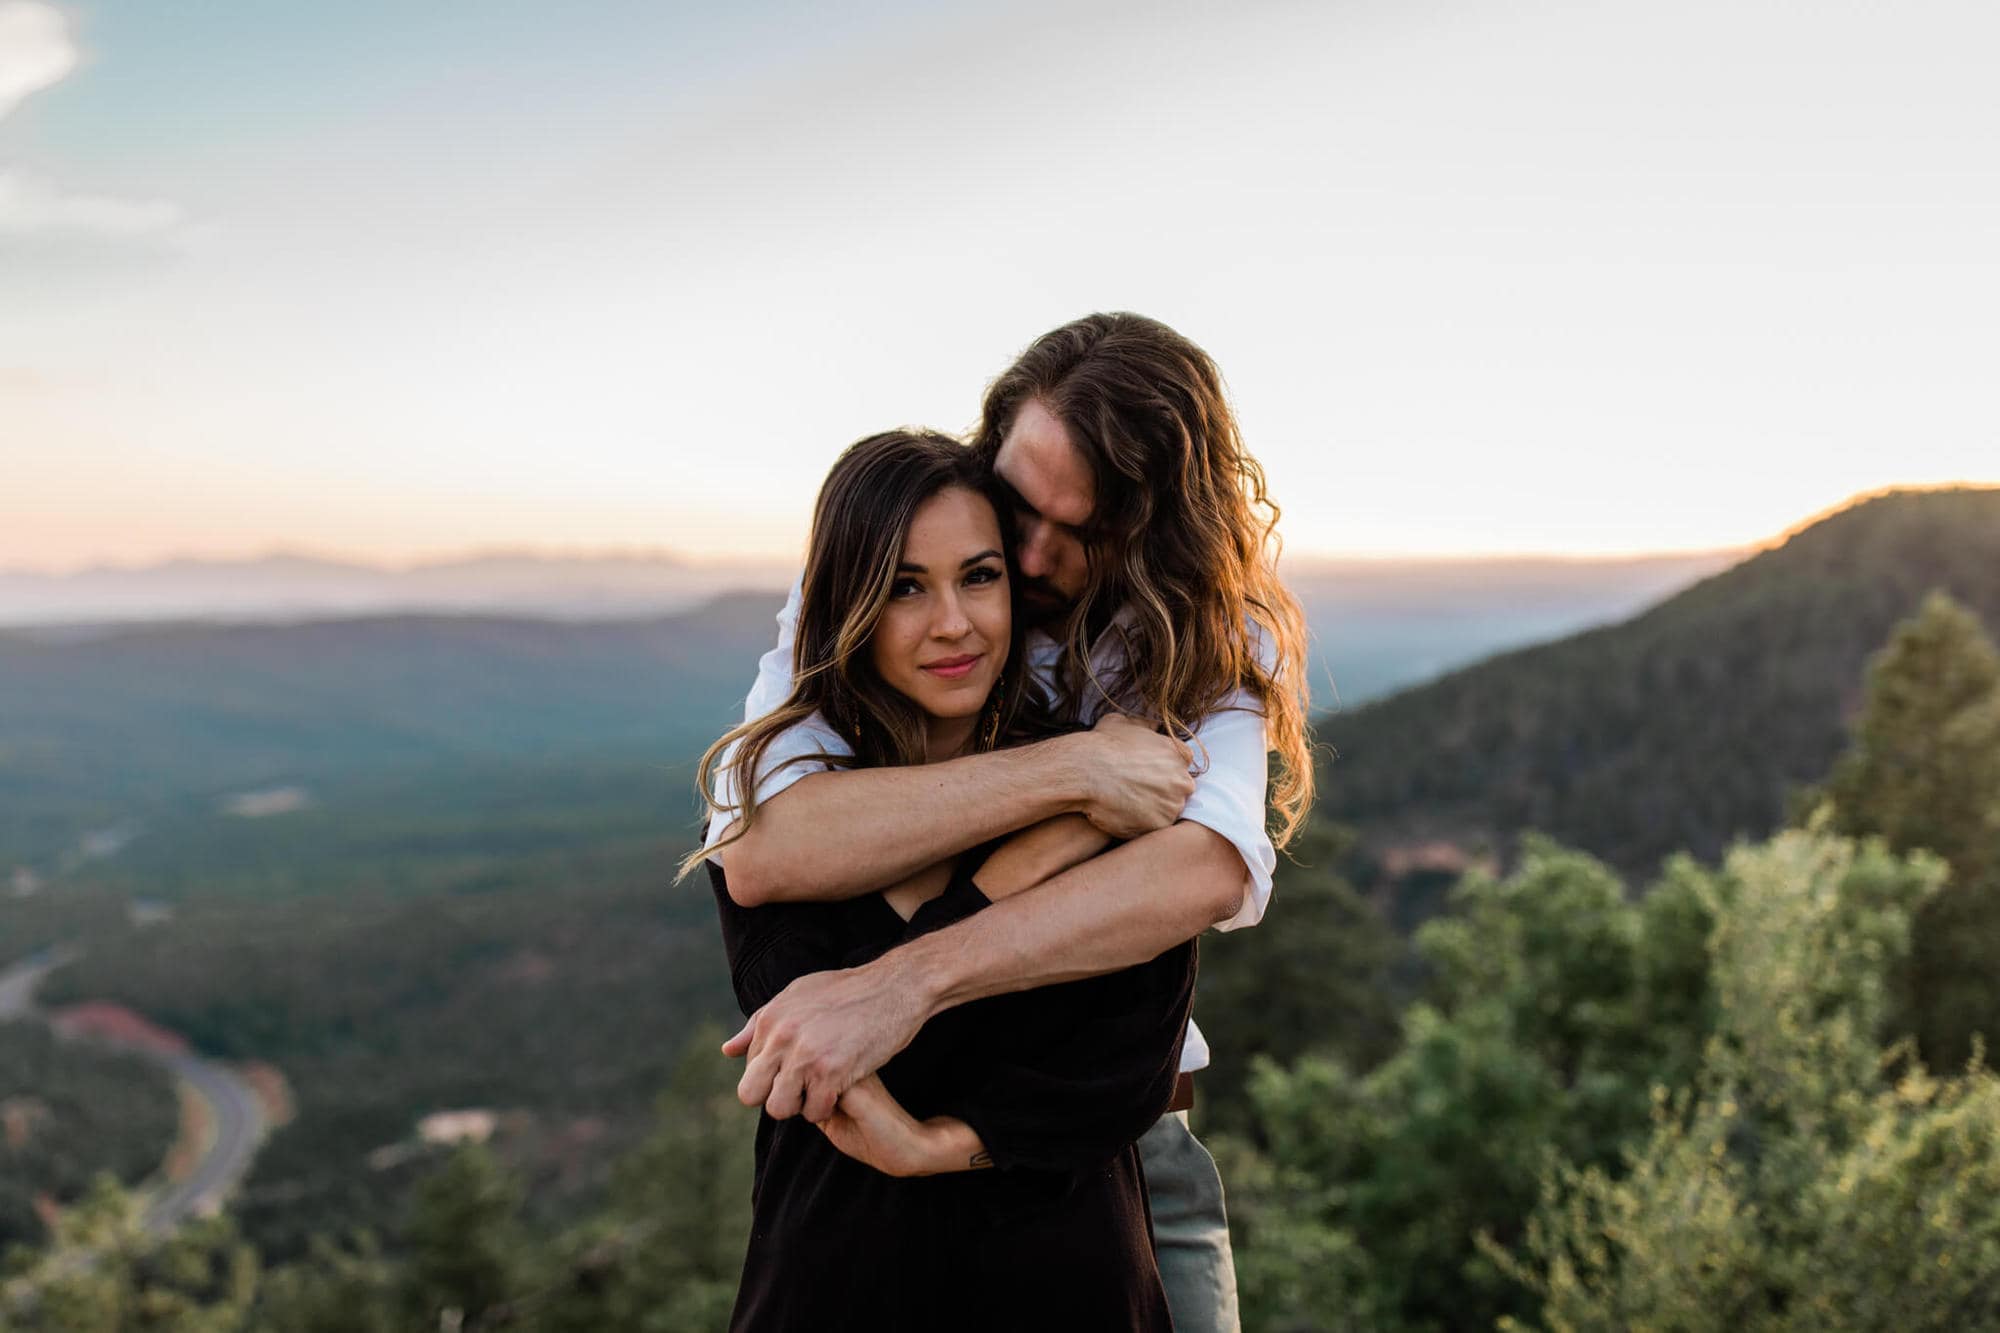 Leah and David had their adventurous forest engagement photos at the Mogollon Rim and it is the perfect spot for adventure and forest vibes.